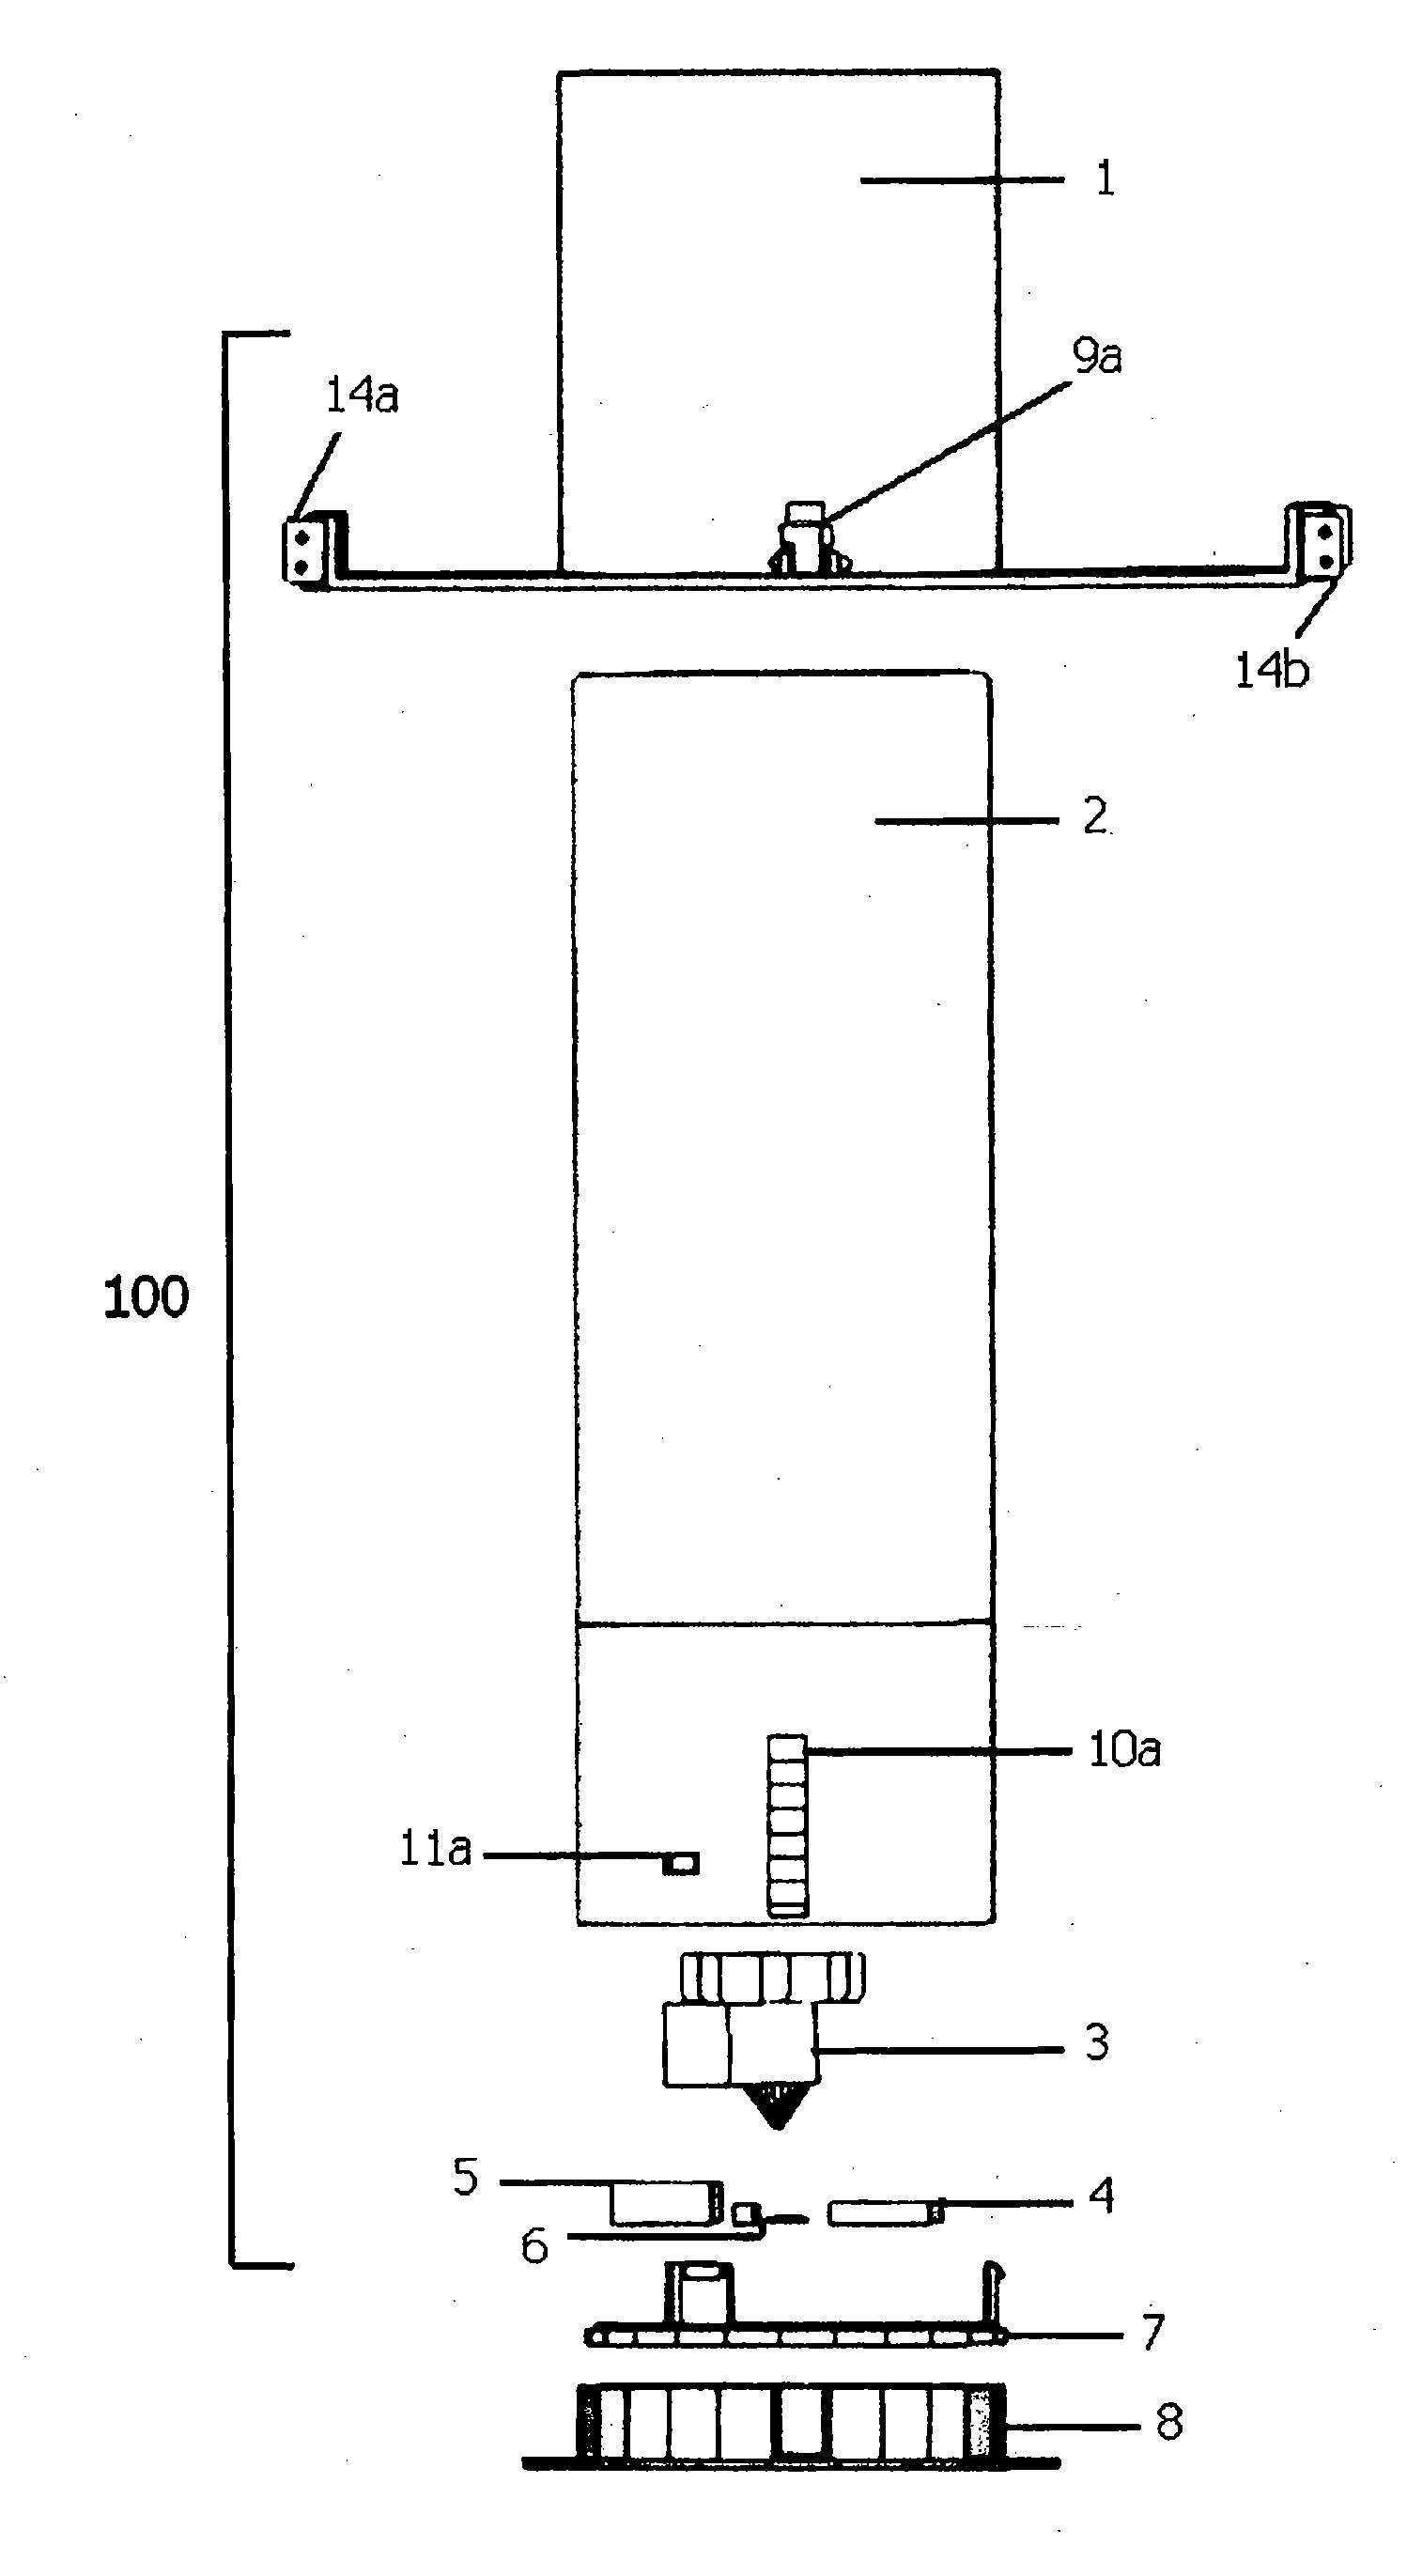 Self-contained self-actuated modular fire suppression unit